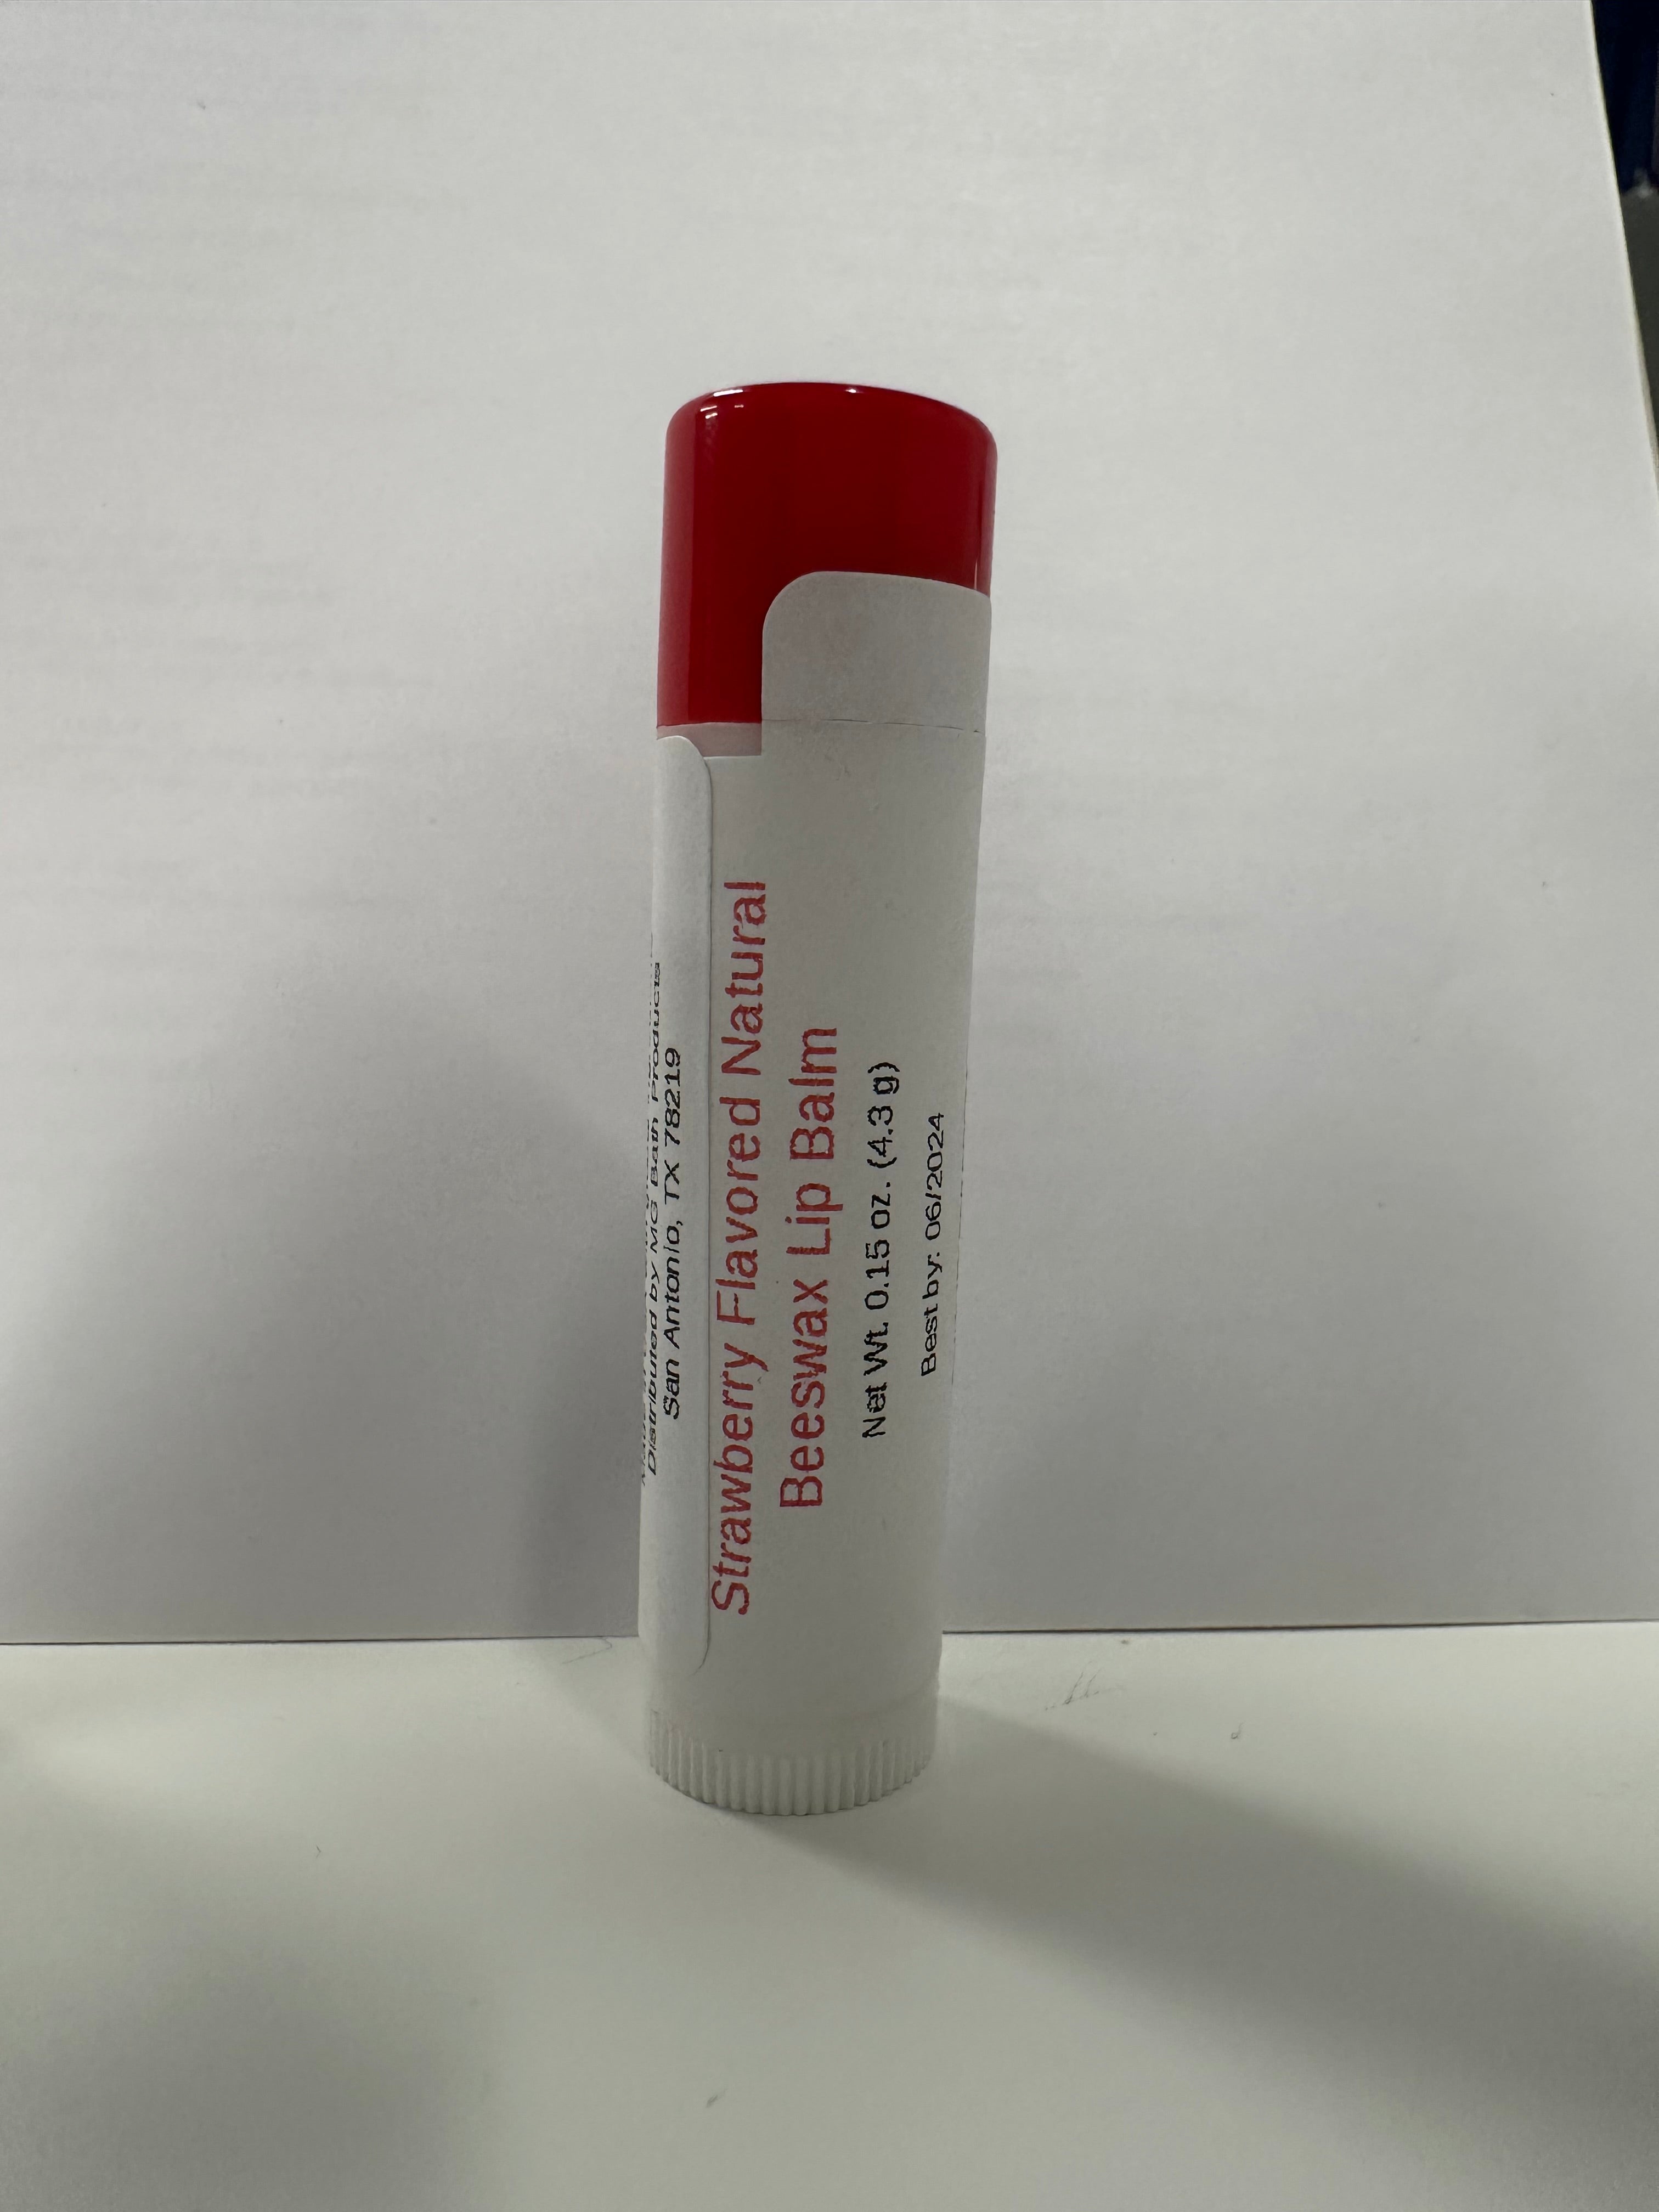 Lip balm in tube that has a red colored cap on it.